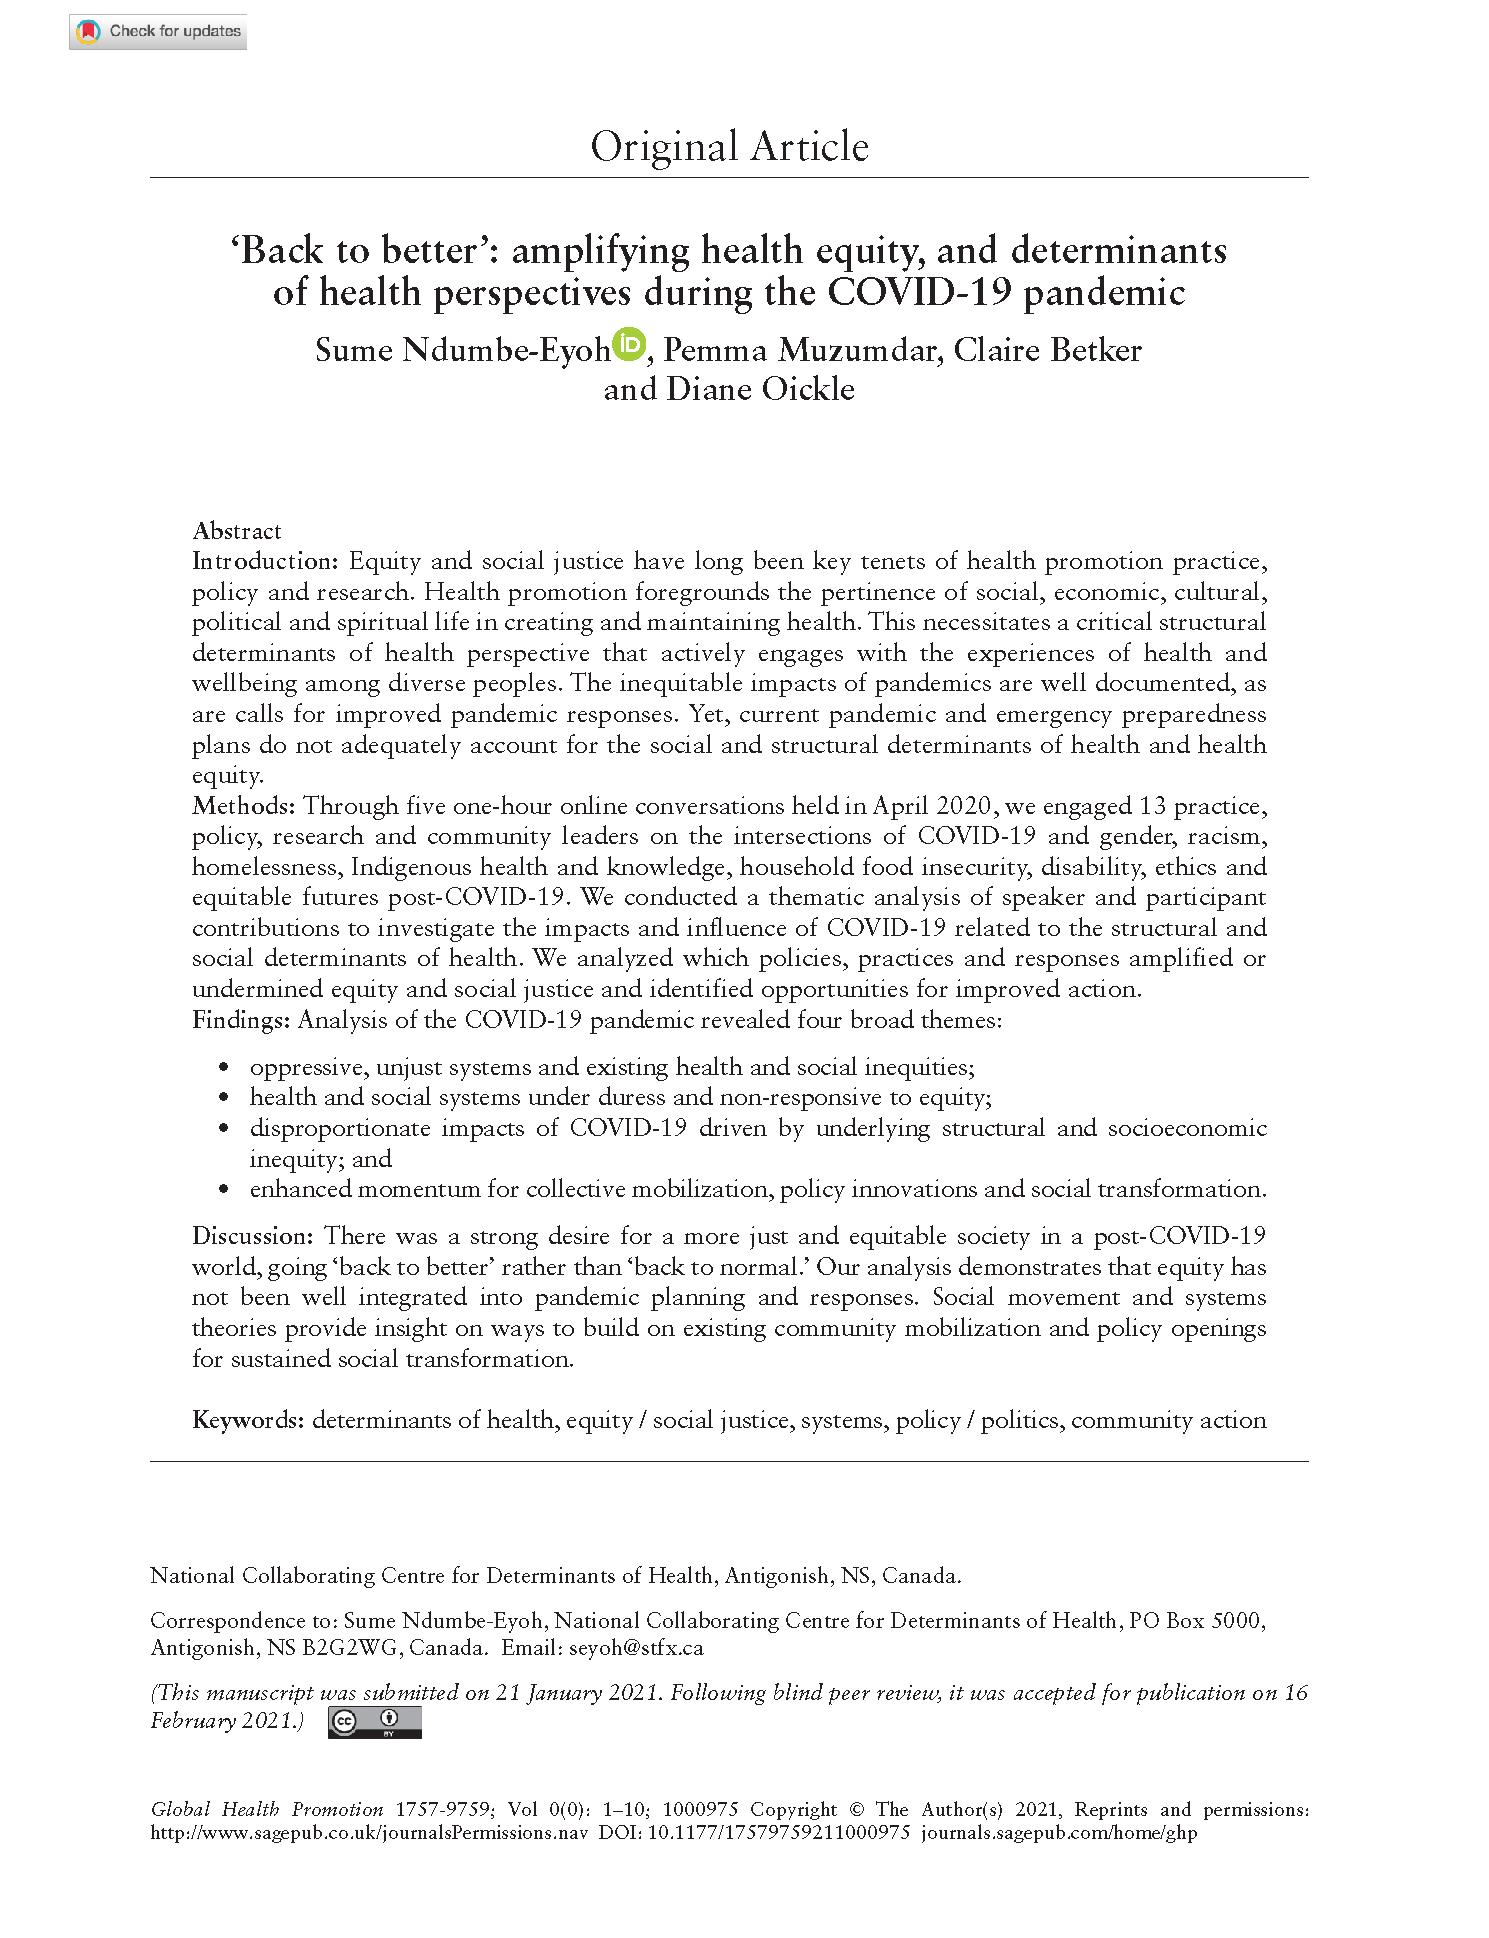 'Back to better’: Amplifying health equity, and determinants of health perspectives during the COVID-19 pandemic